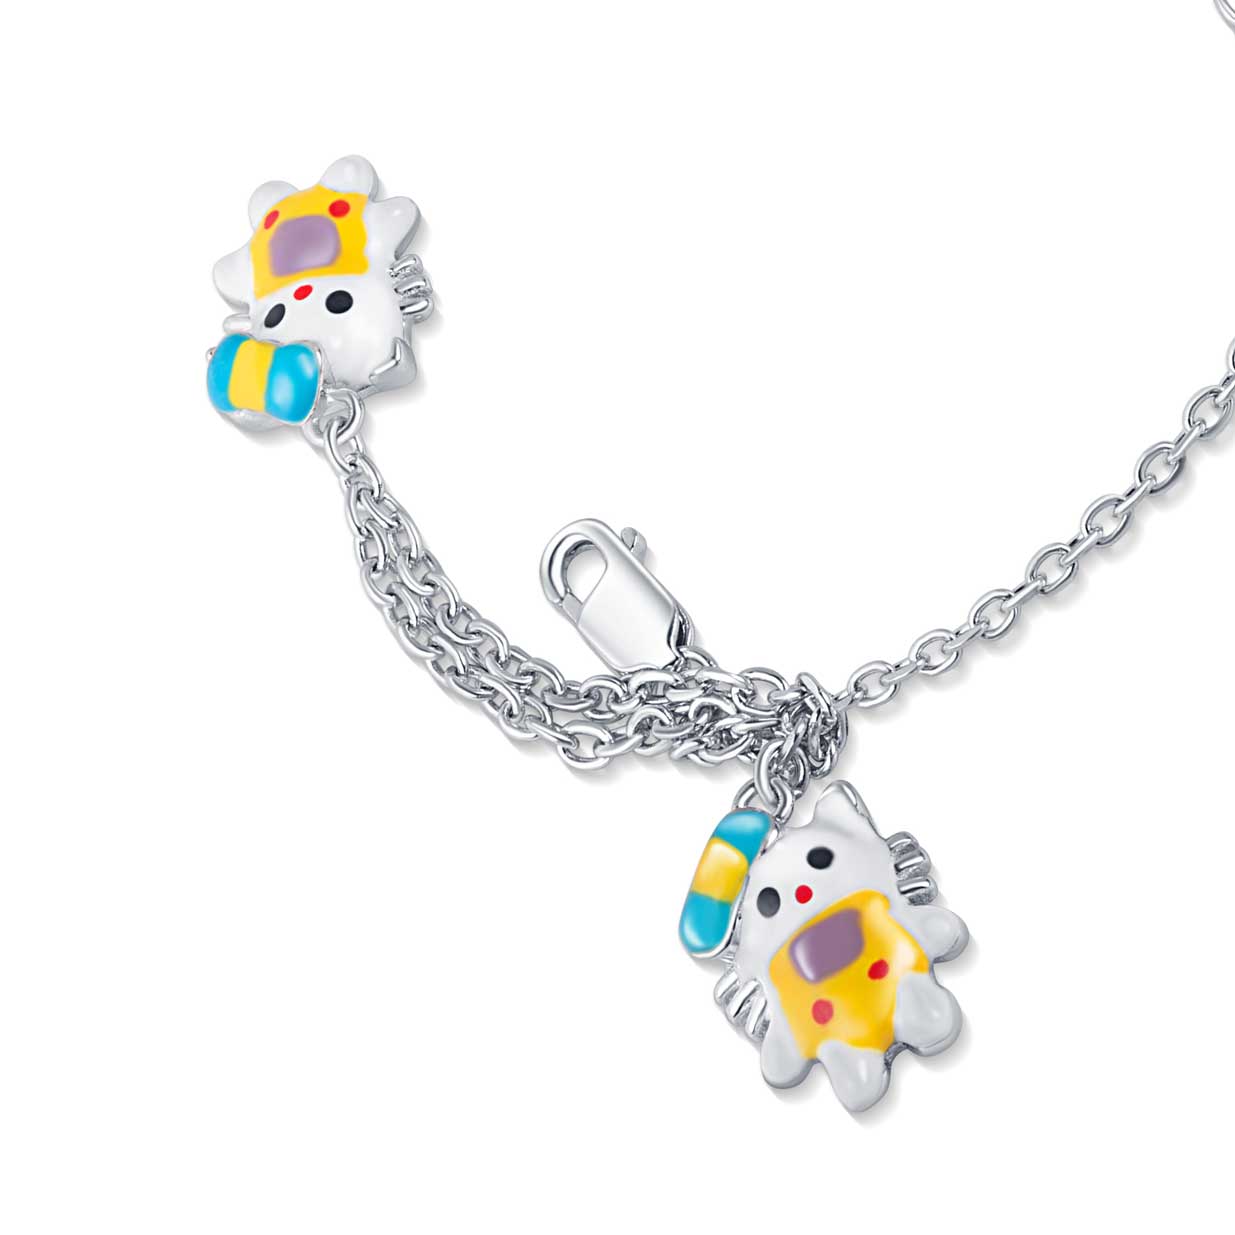 Experience luxury and comfort with our Yellow Dress Kitty Charms Sterling Silver Bracelet for Babies. Made with Sterling silver, this bracelet is comfortable for babies aged 1.5 to 2 years. Adorned with precious enamel-finished hello kitty charms, it's the perfect gift for your little one. Its silver finish adds a touch of elegance.